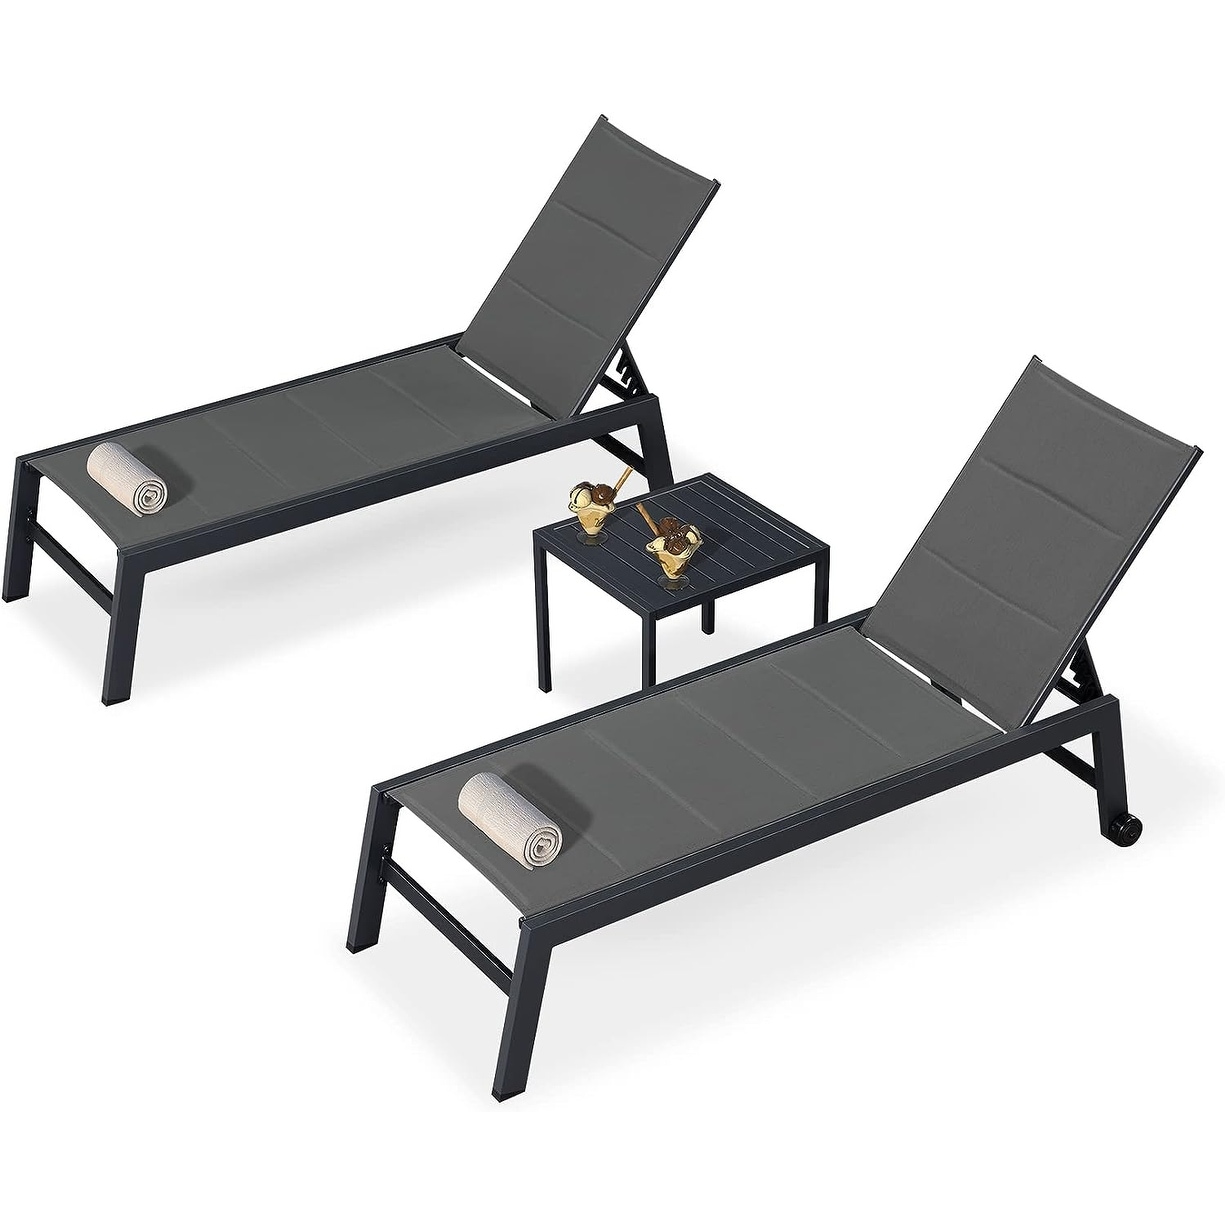 Purple Leaf Patio Chaise Lounge Set Of 2 Chairs And Side Table  Grey - 64.17x23.23x14.57